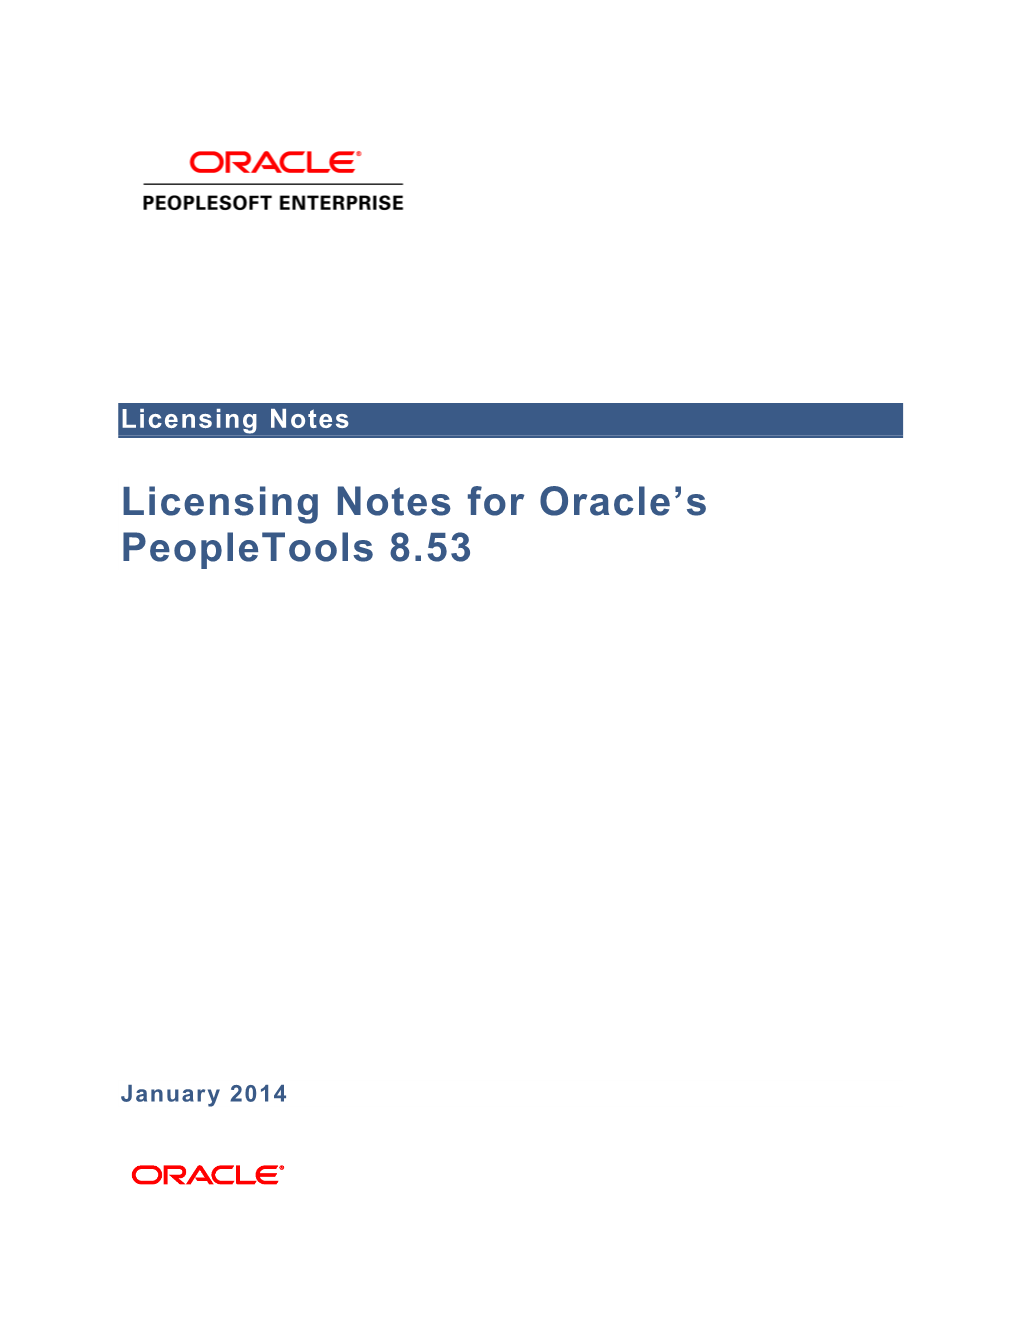 Licensing Notes for Oracle's Peopletools 8.53